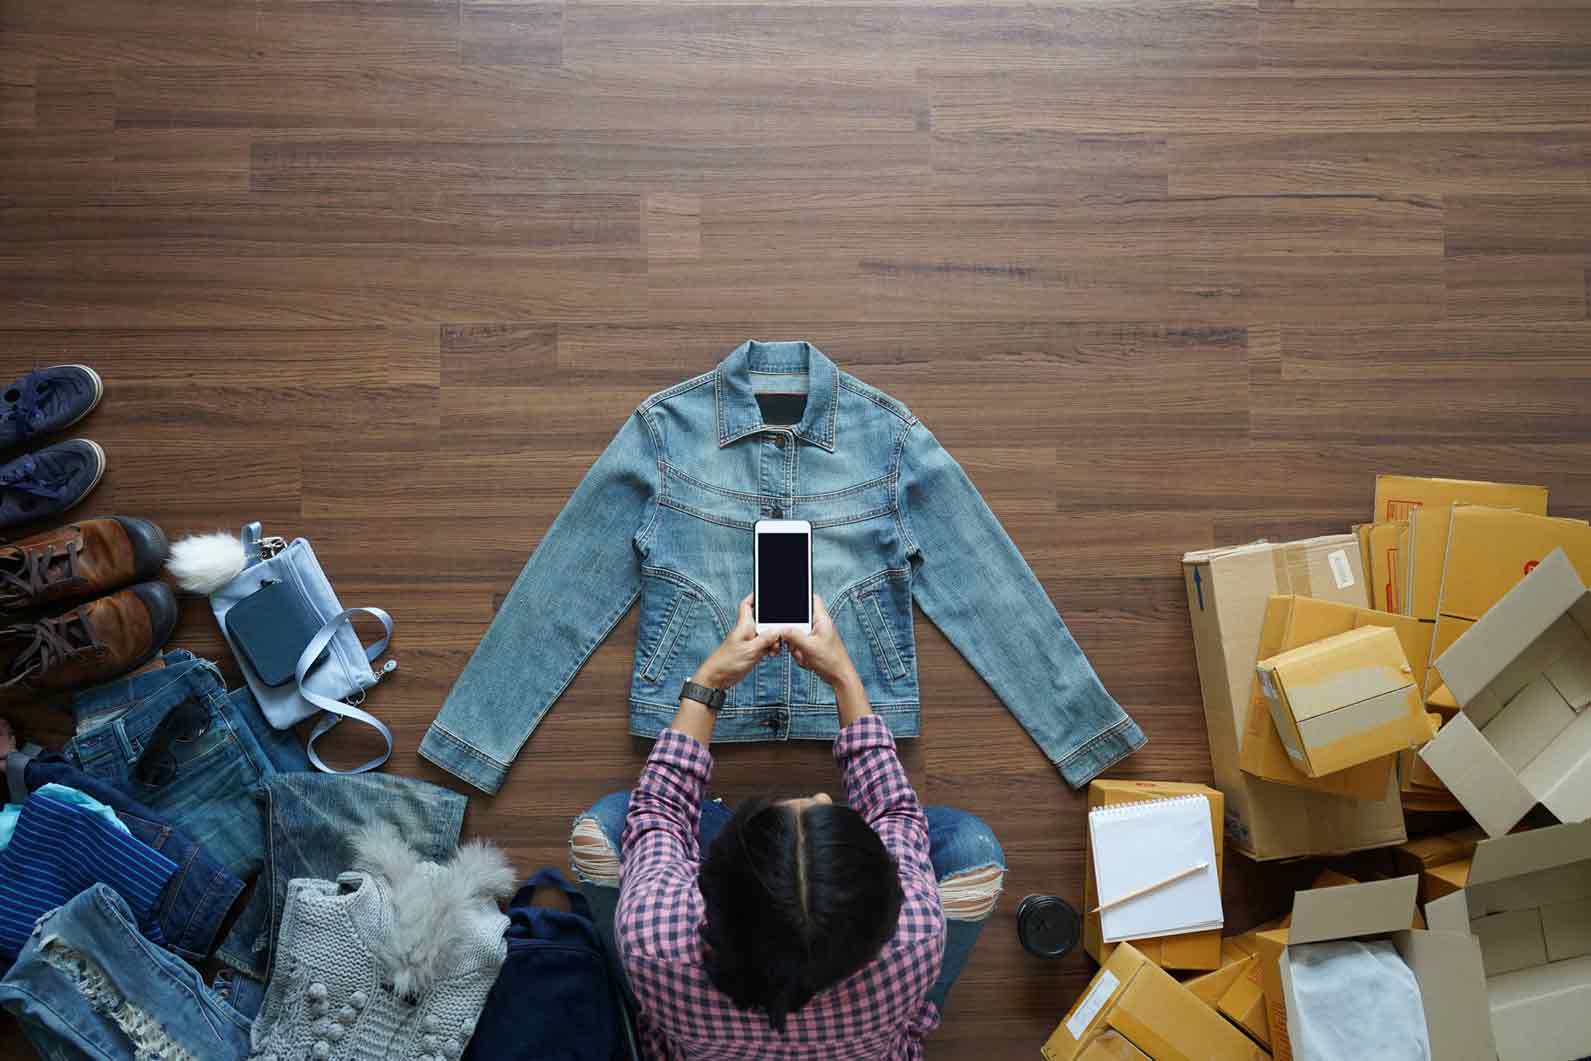  Woman taking a photo of a denim jacket laid out on her floor alongside shoes, bags and cardboard boxes that she is planning to use to sell on Trade Me.